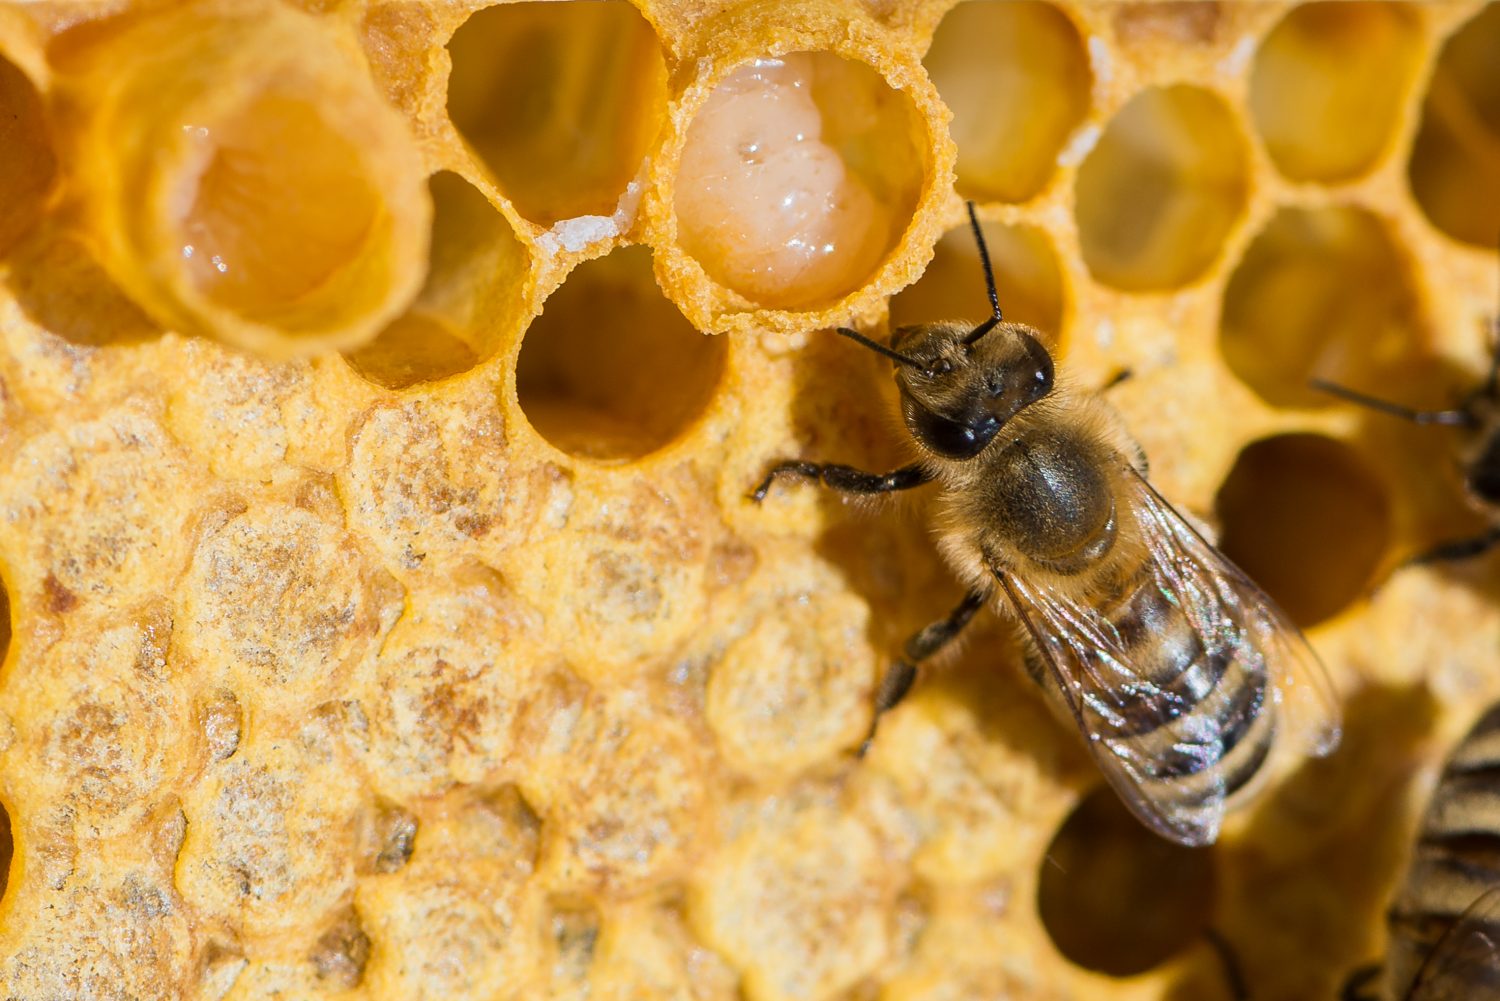 How to Harvest Royal Jelly